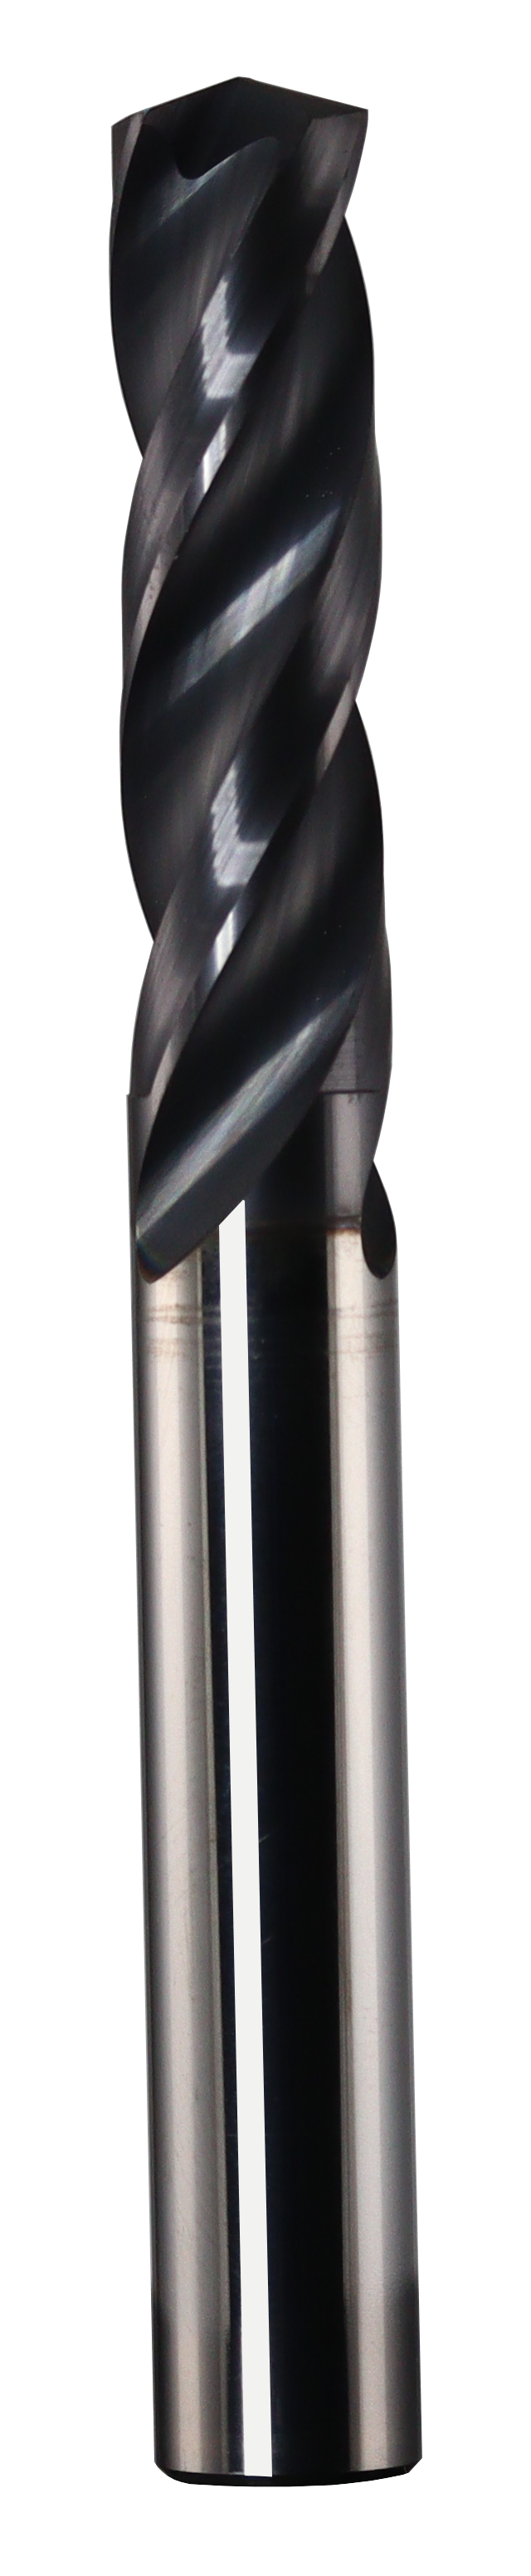 9.00mm Dia, 150 Degree Point, Solid Carbide Drill - 69025